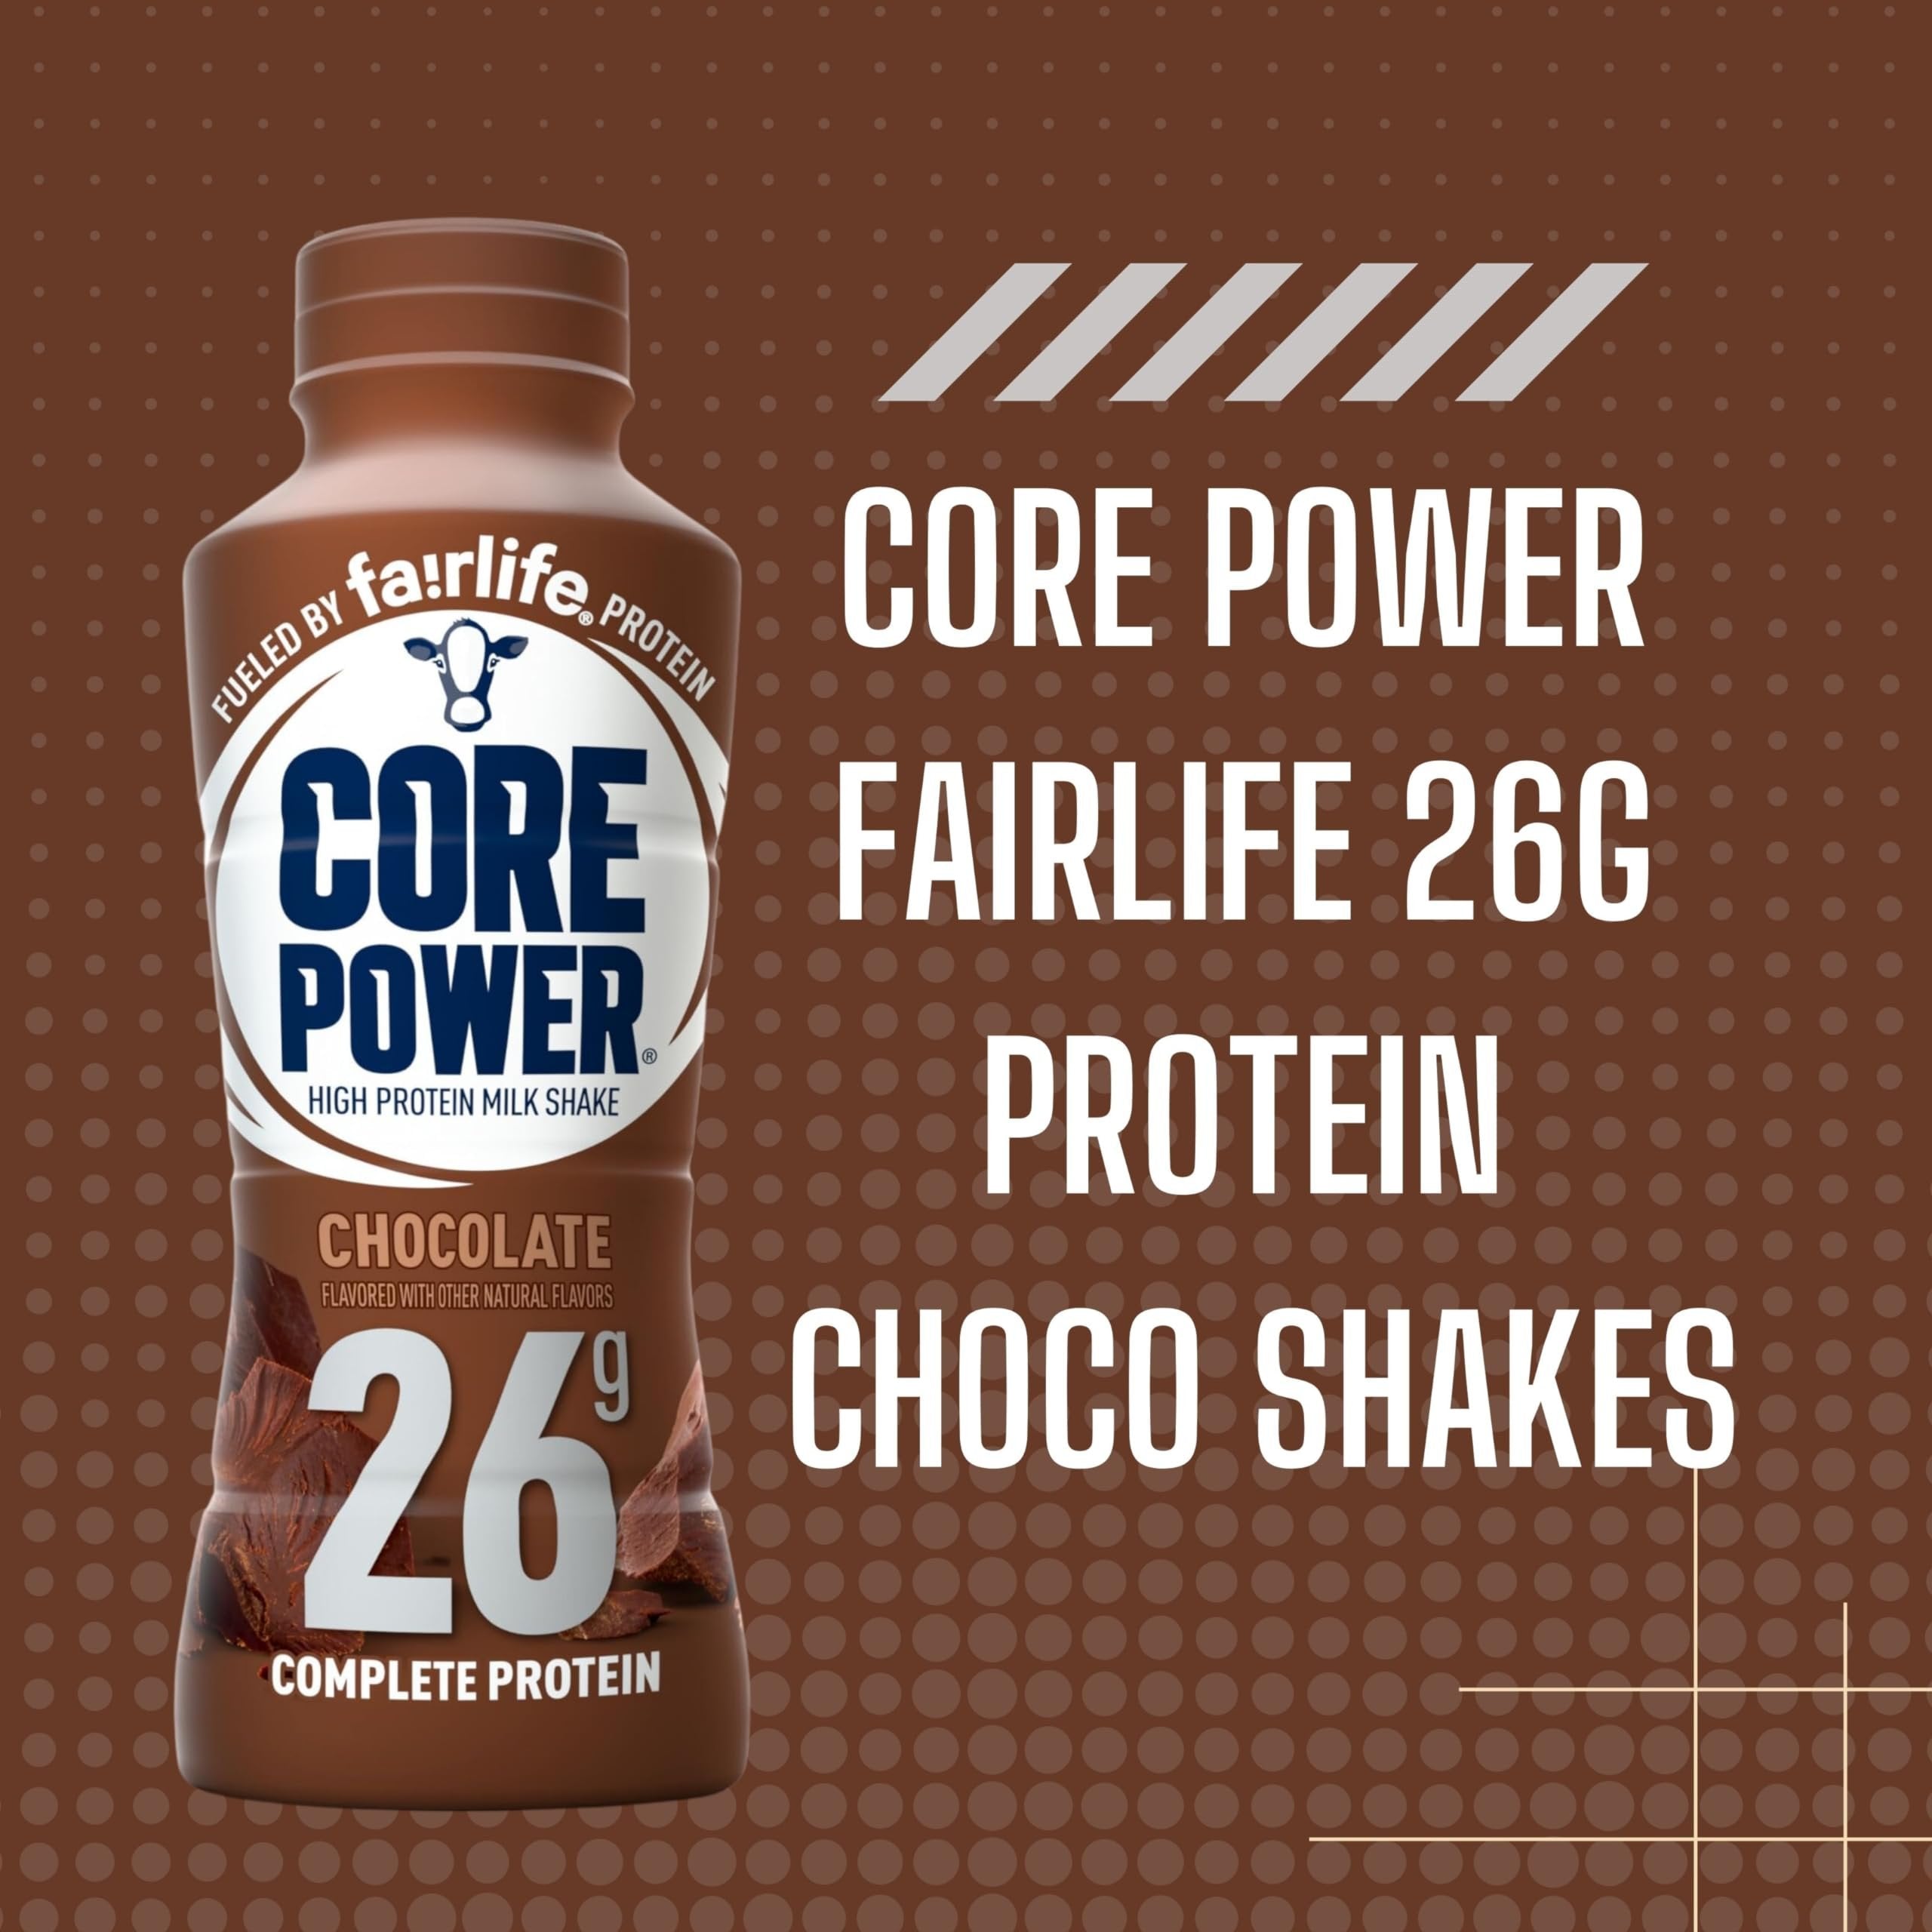 Core Power Fairlife 26g Protein Milk Shakes - Ready To Drink for Workout Recovery - Chocolate Flavor, 14 Fl Oz (Pack of 12) and Multi-Purpose Key Chain